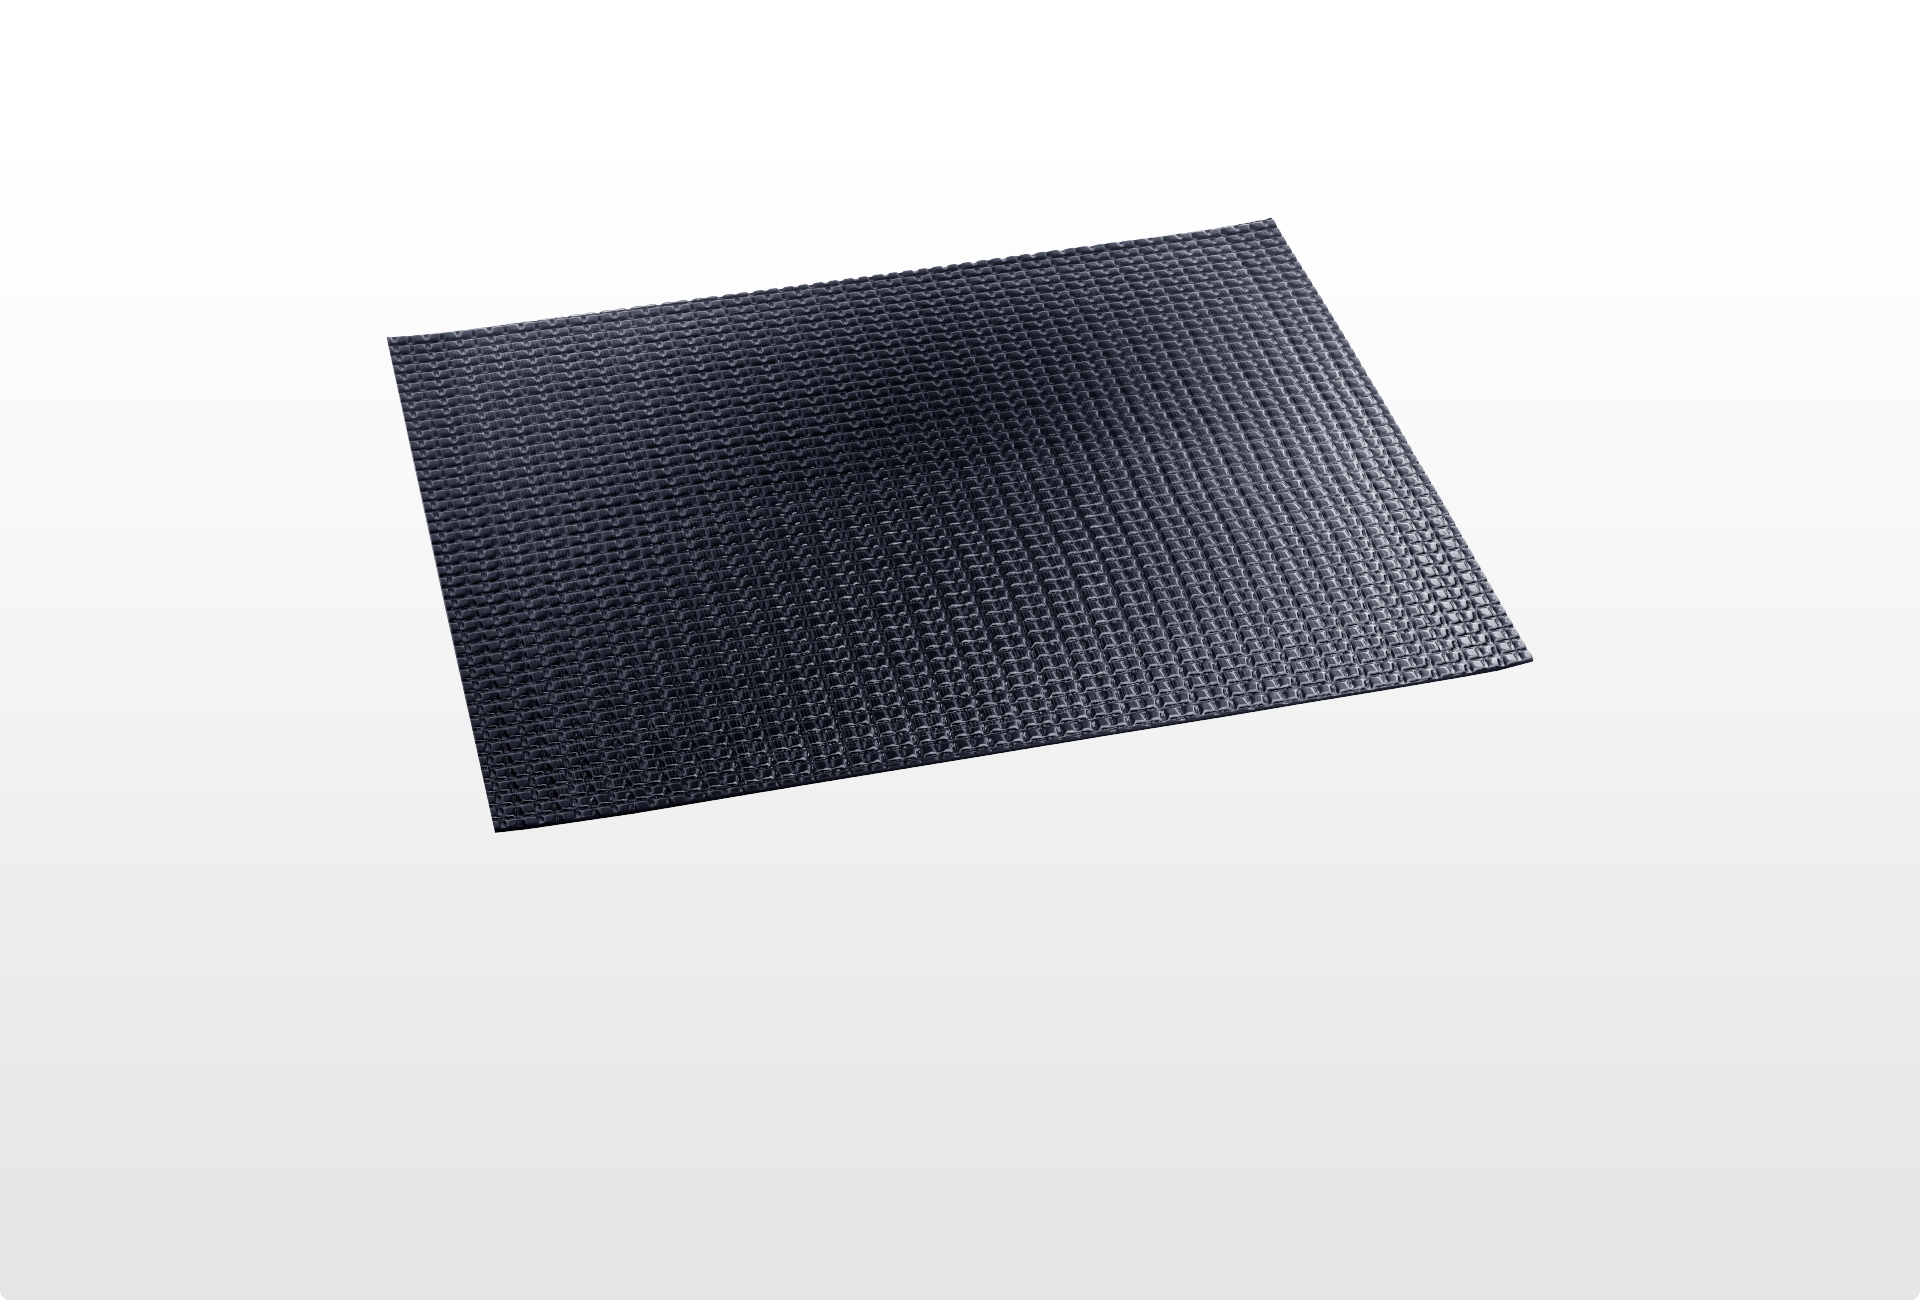 Vehicle-integrated photovoltaics (VIPV): Flexible solar panel delivers 30 percent more power